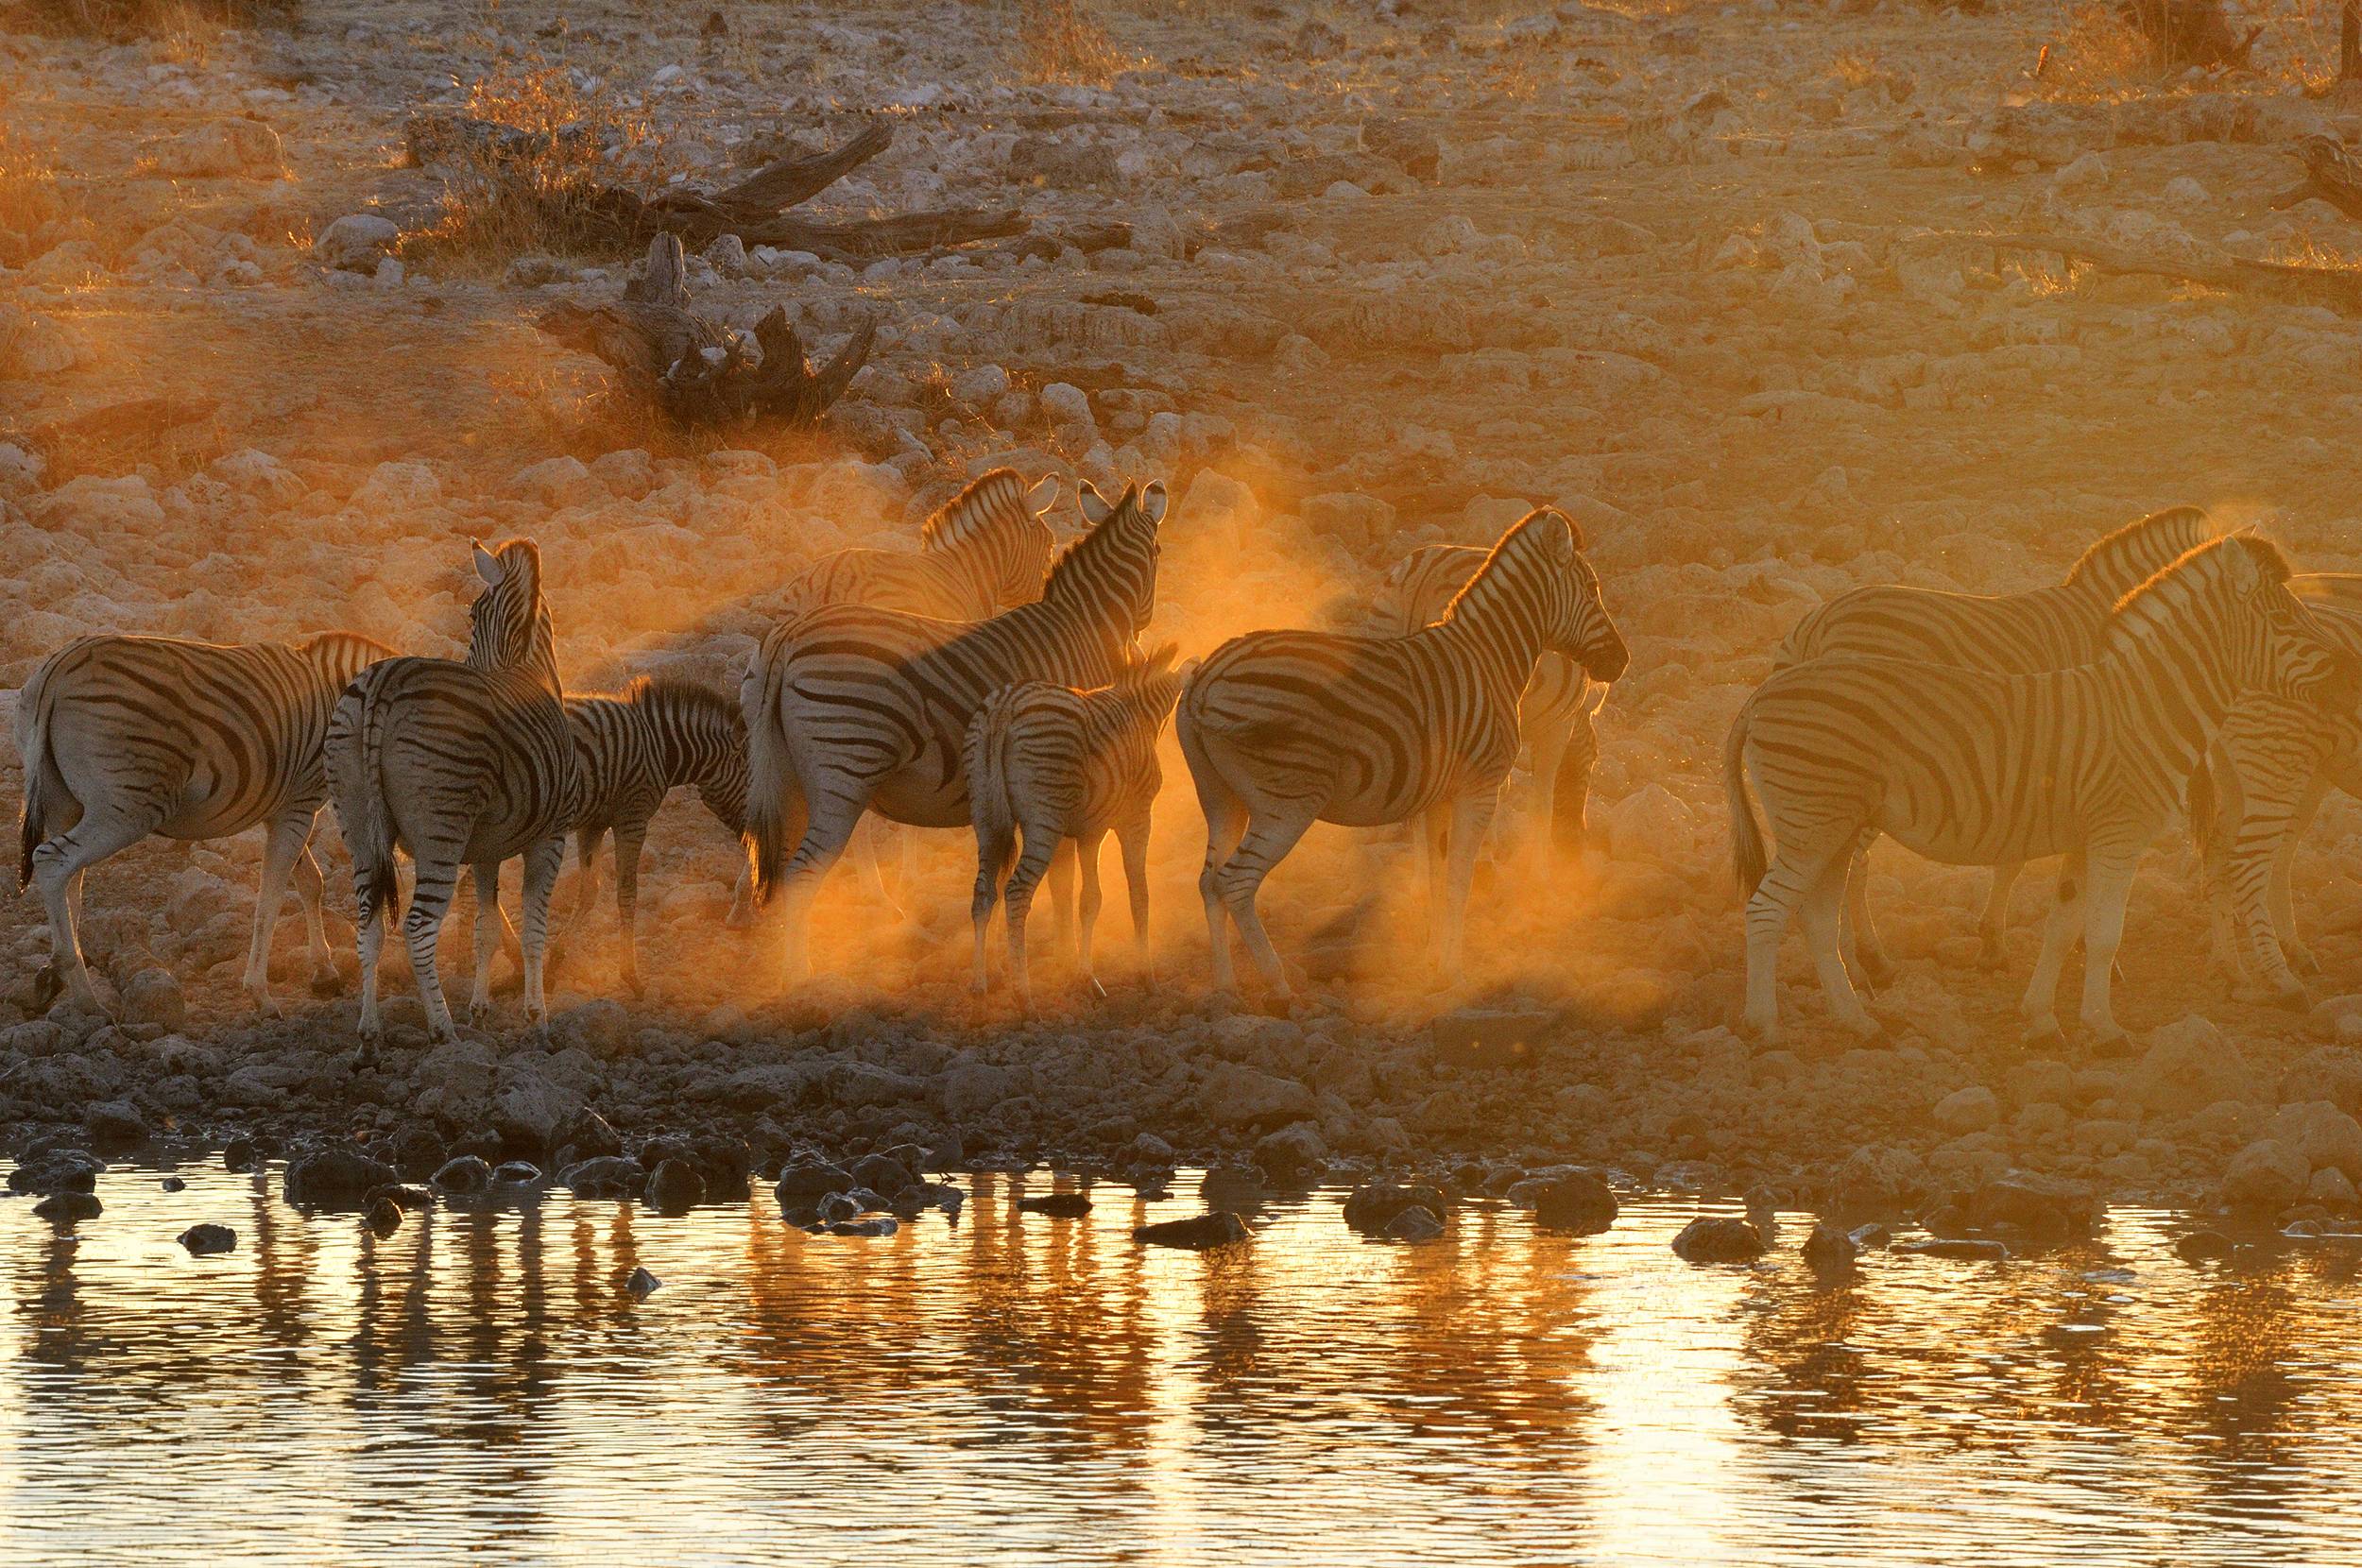 Watch a magical sunset at a watering hole